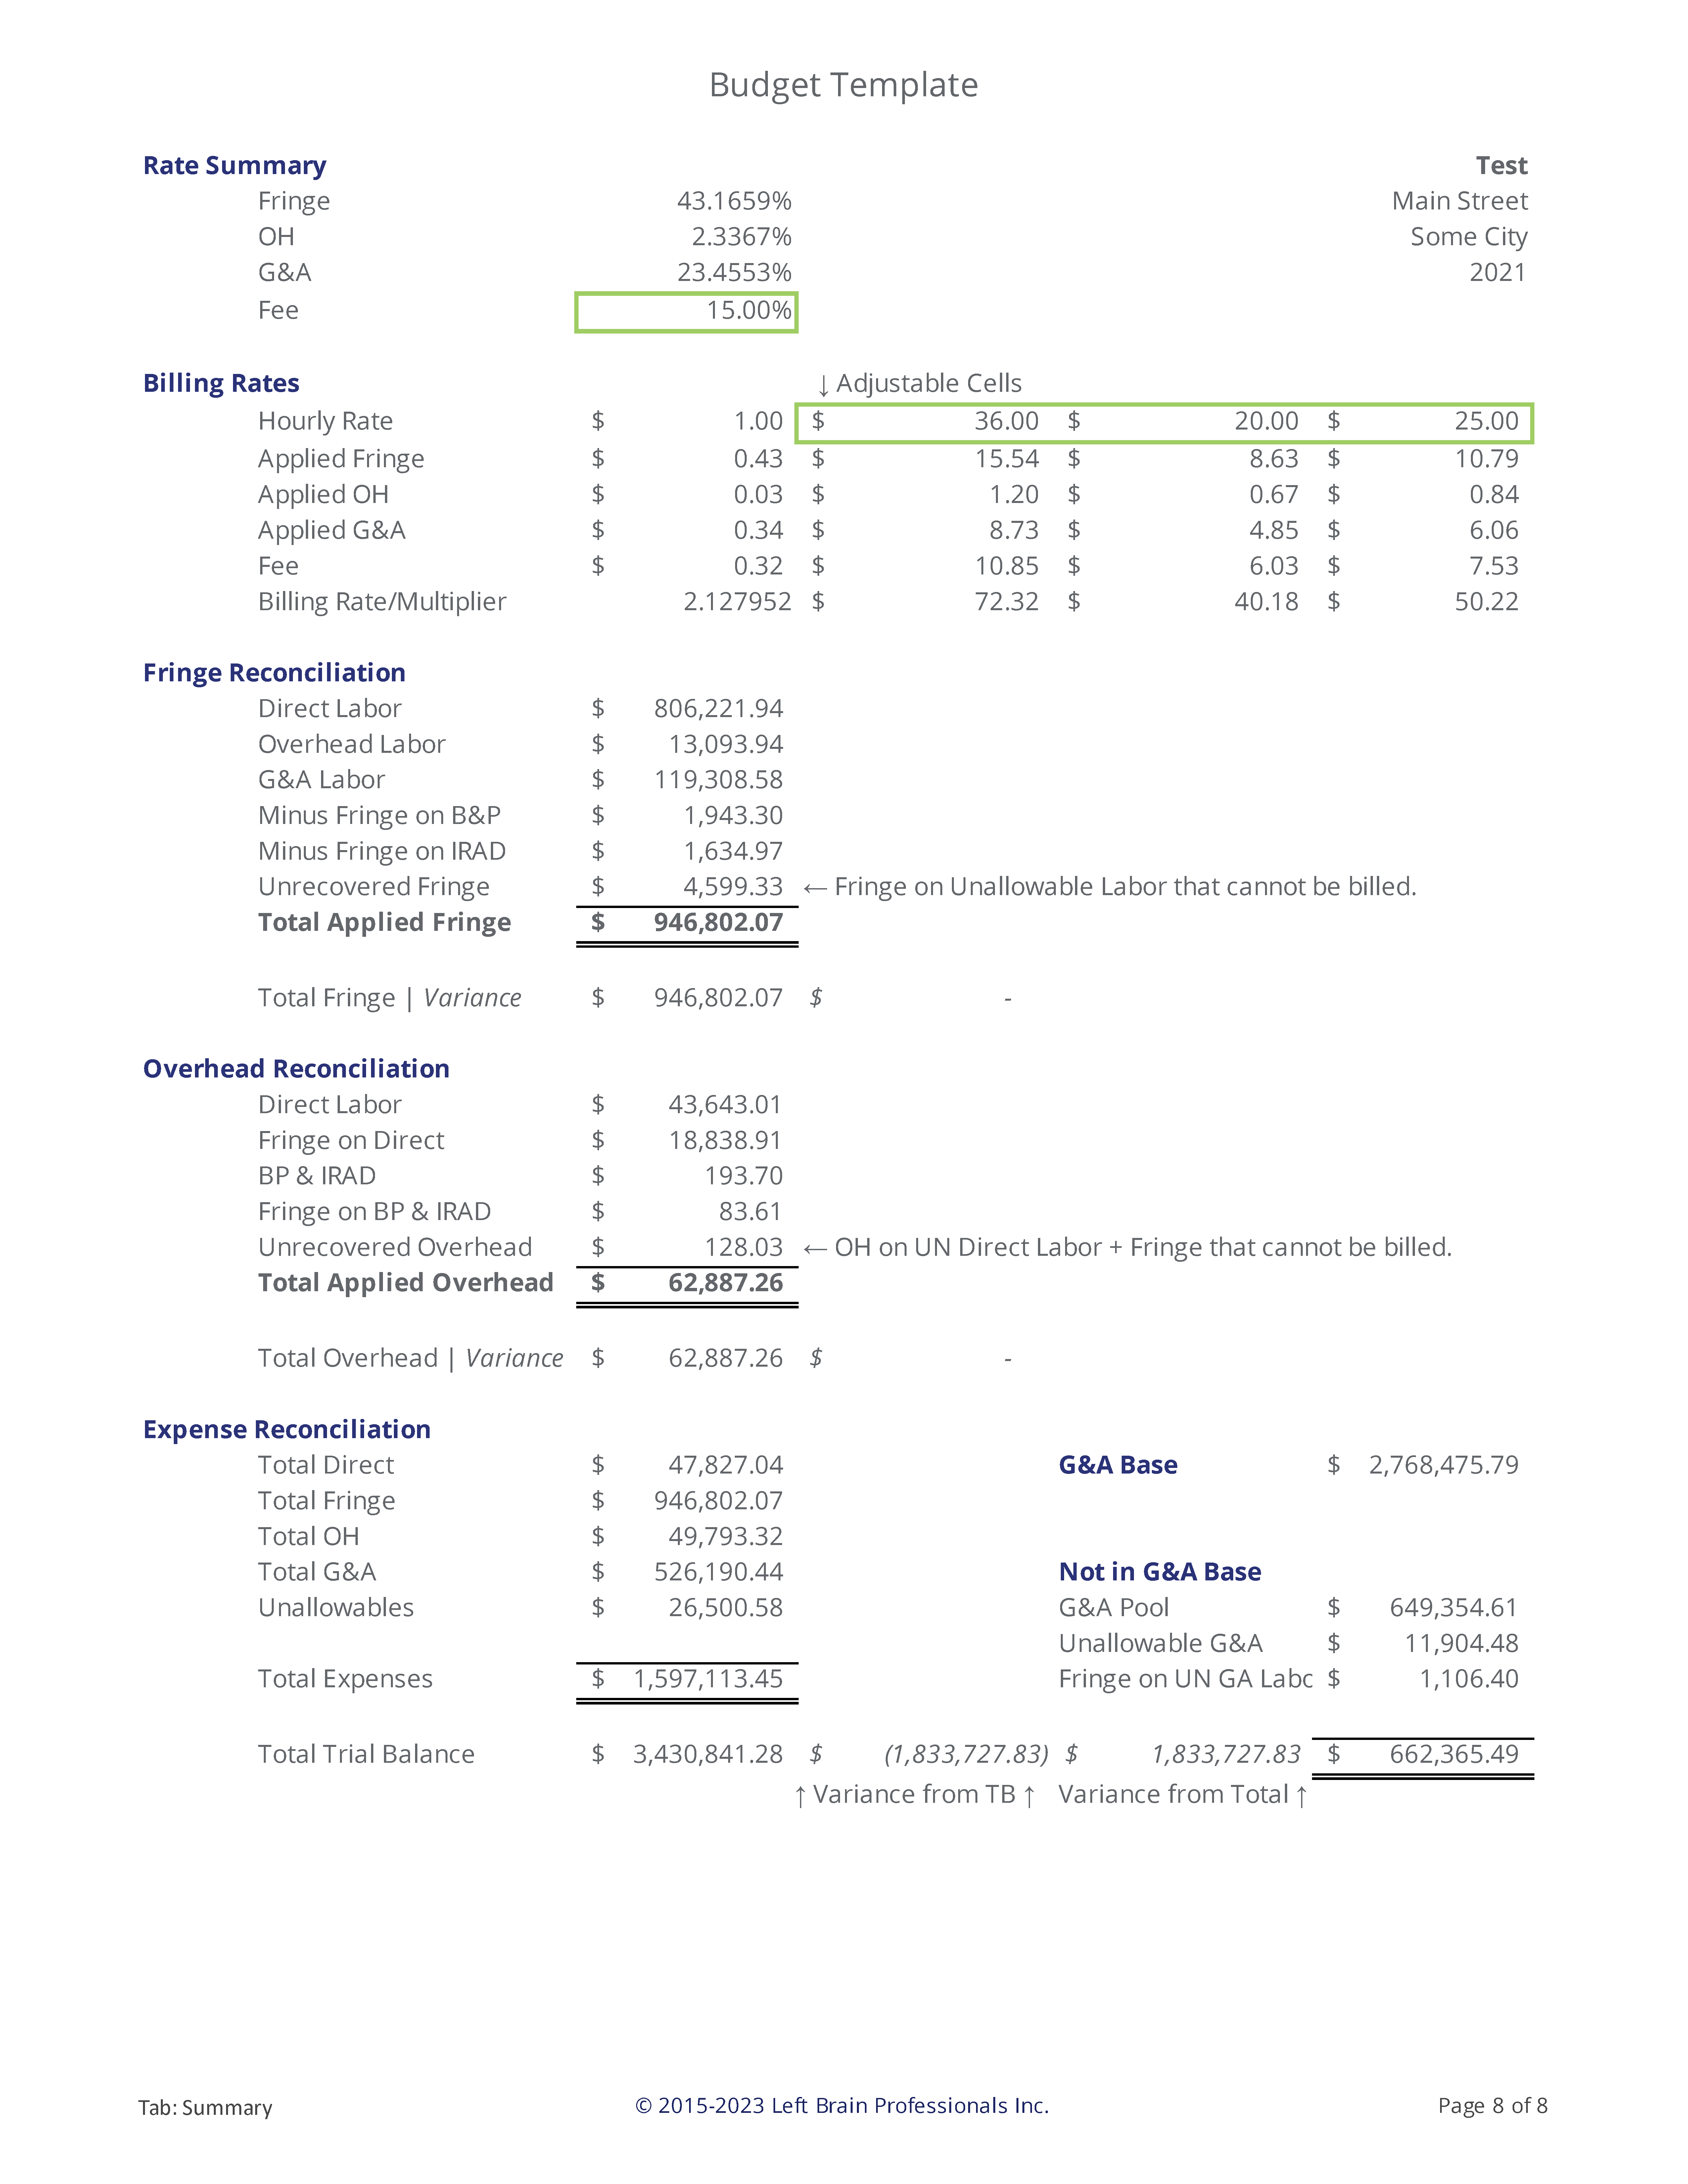 Budget Page 8